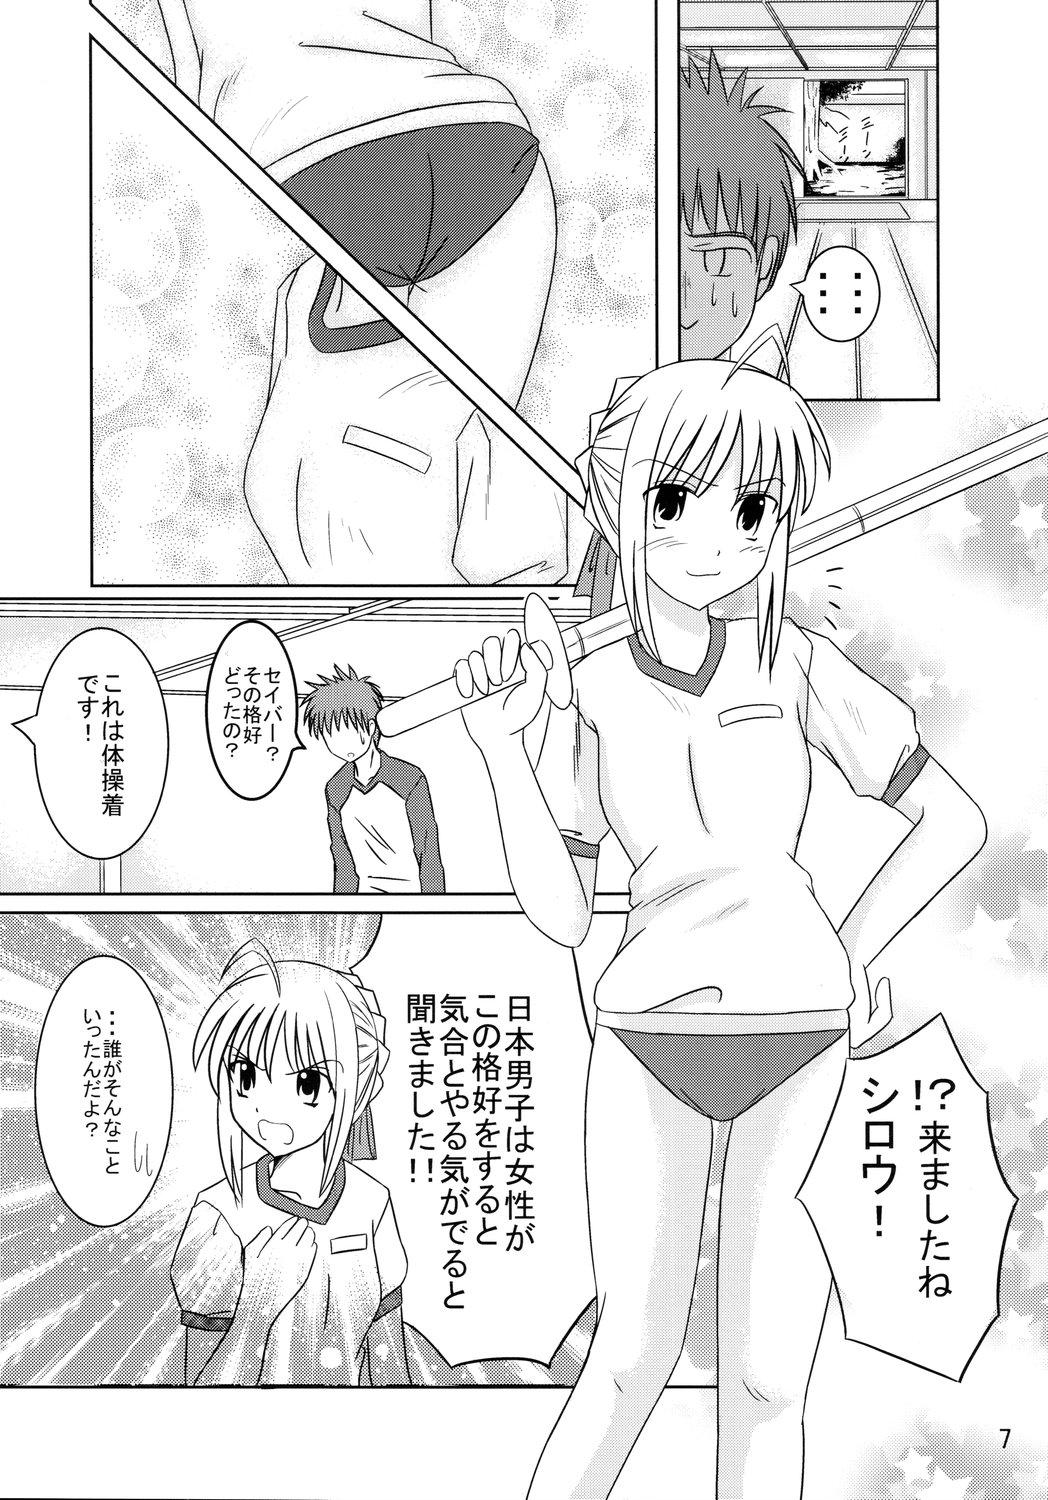 Bisex Saber Of Sanity - Fate stay night Handsome - Page 6